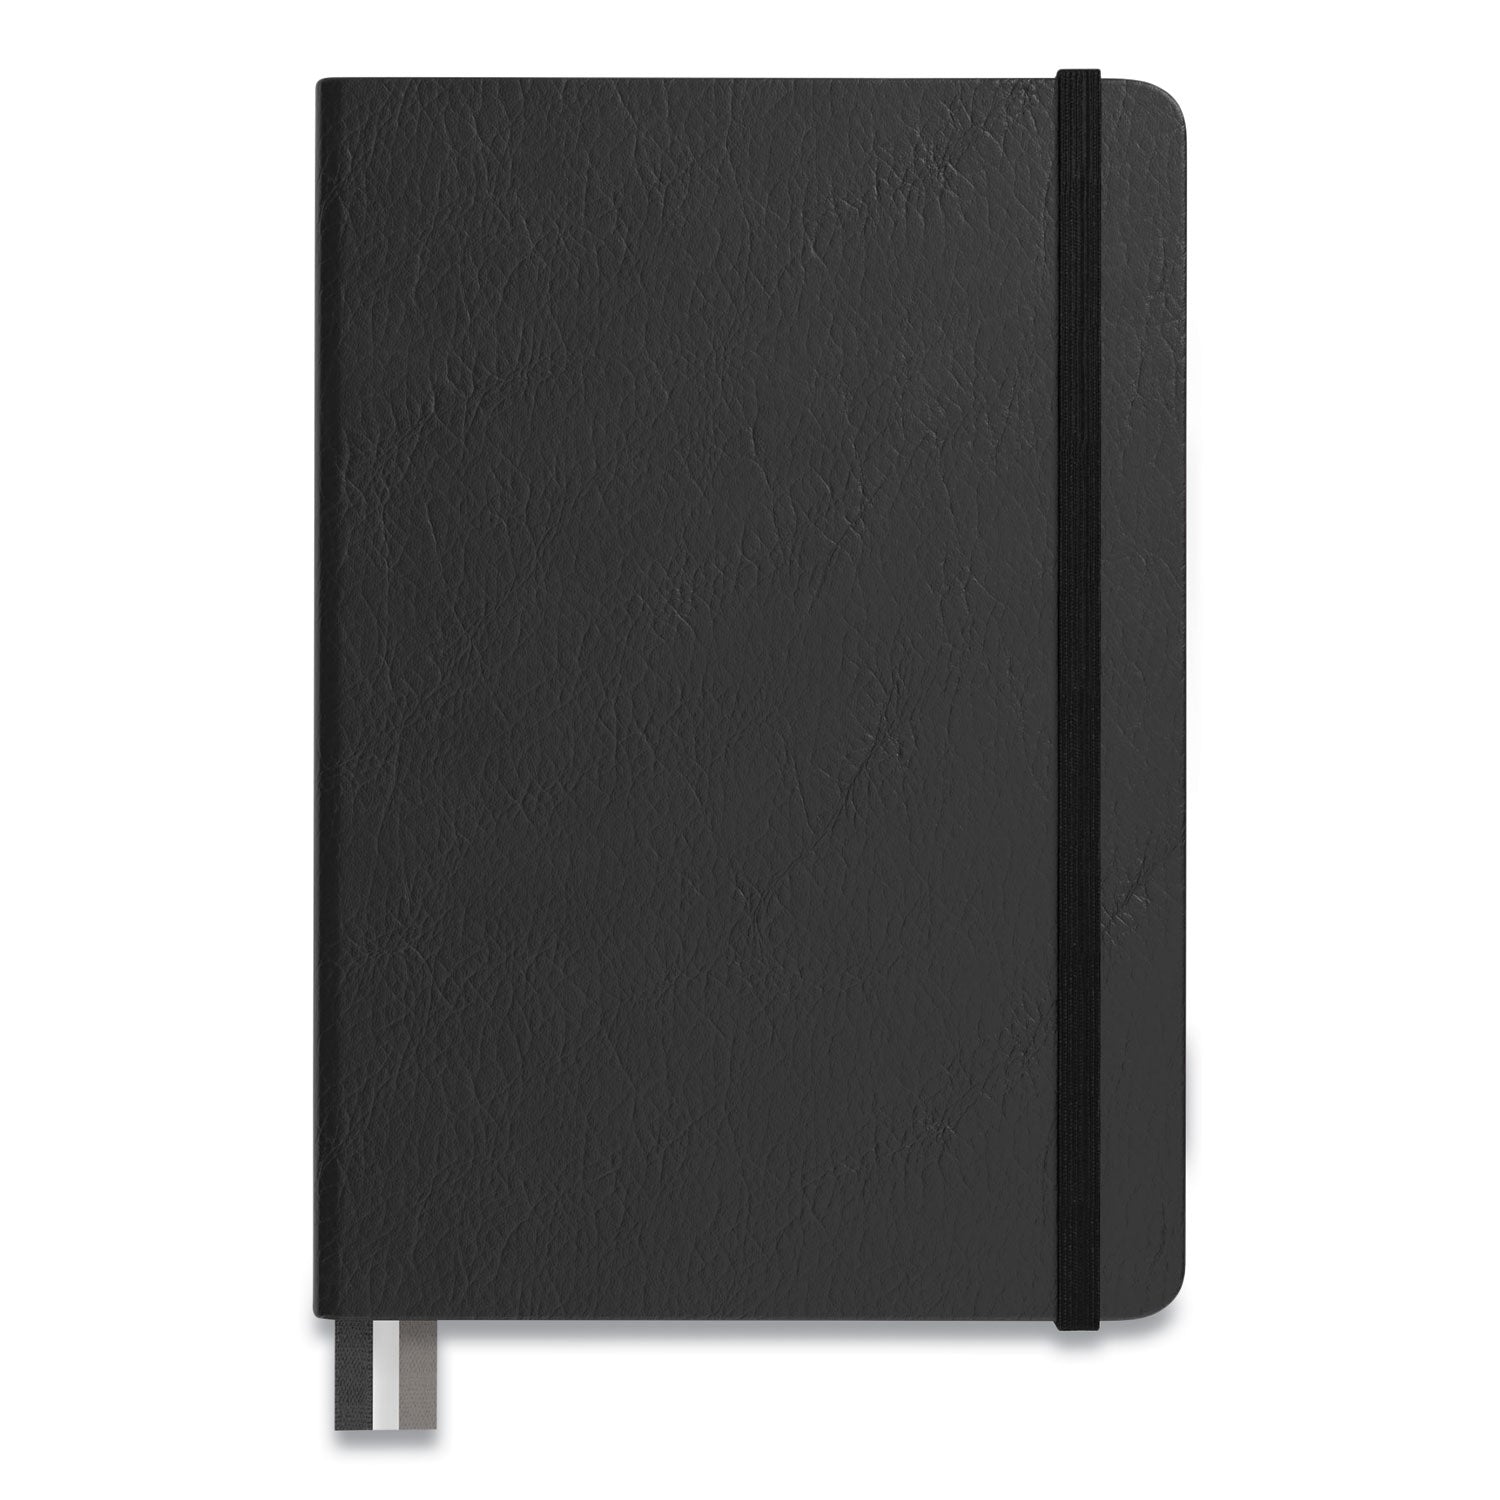 flexible-cover-business-journal-elastic-closure-1-subject-dotted-rule-black-cover-128-8-x-55-sheets_tud24377283 - 4